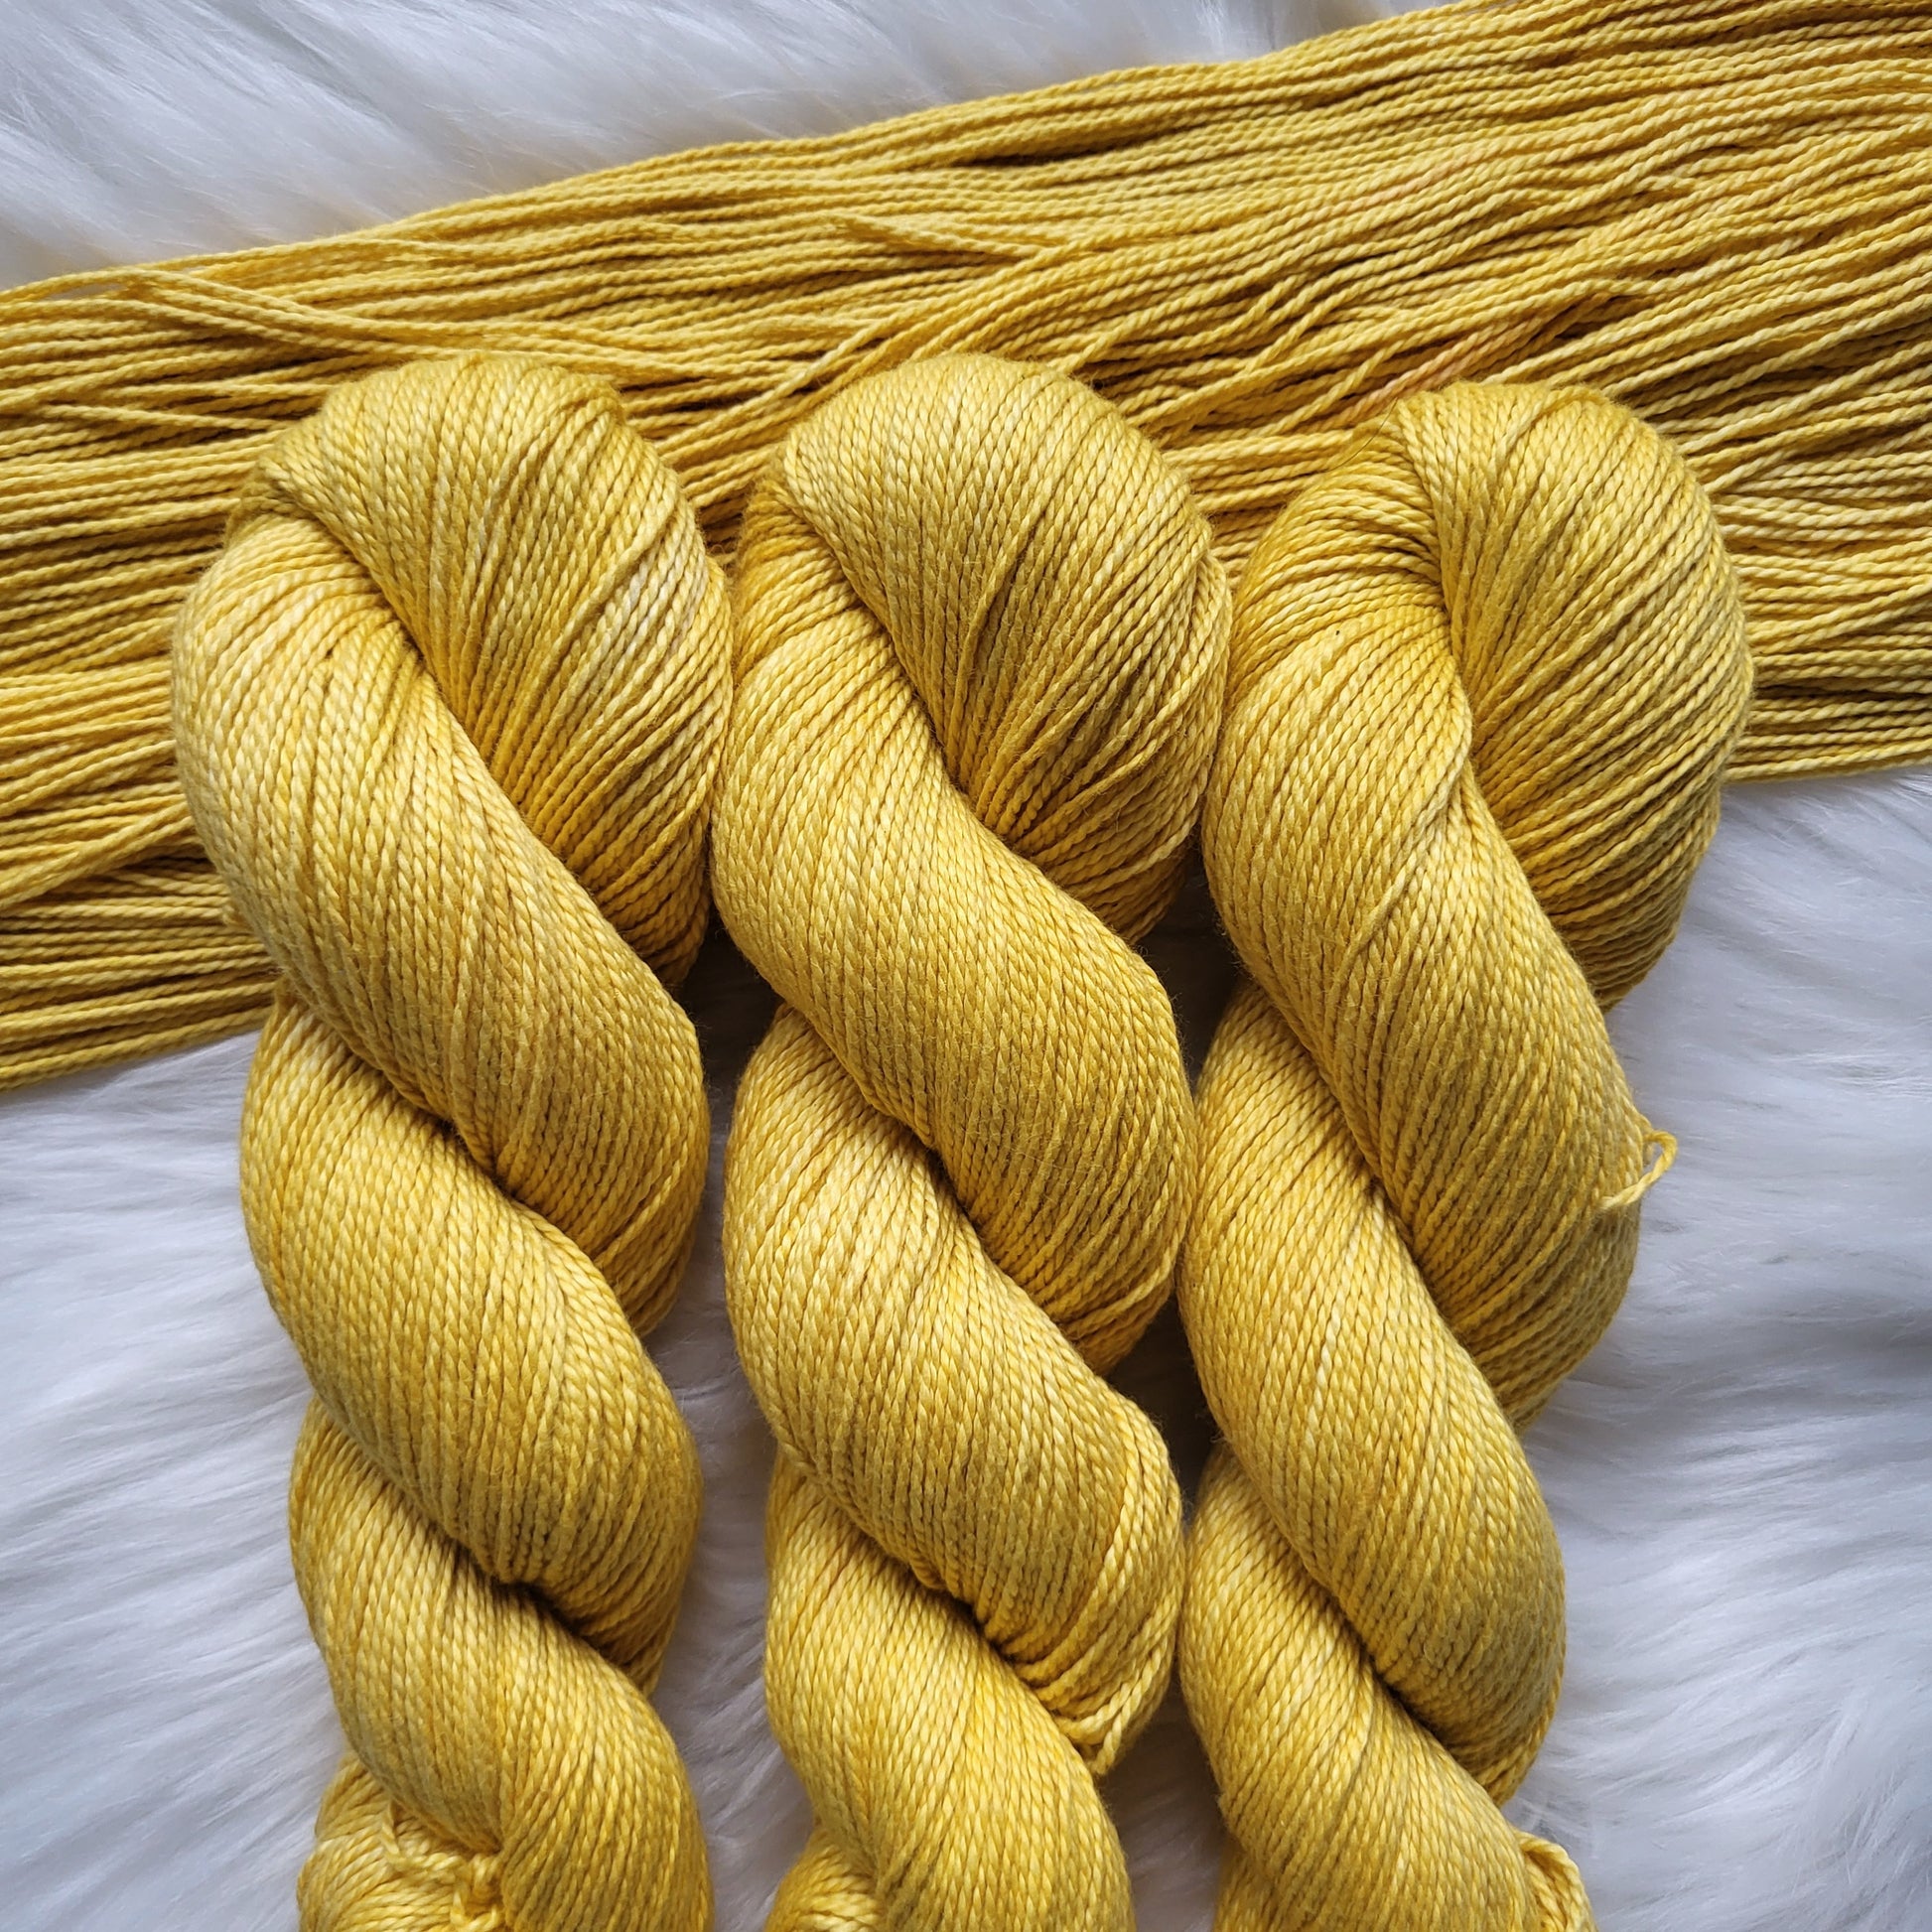 Hand-dyed pima cotton yarn from Pittsburgh PA inspired by Dune by Frank Herbert